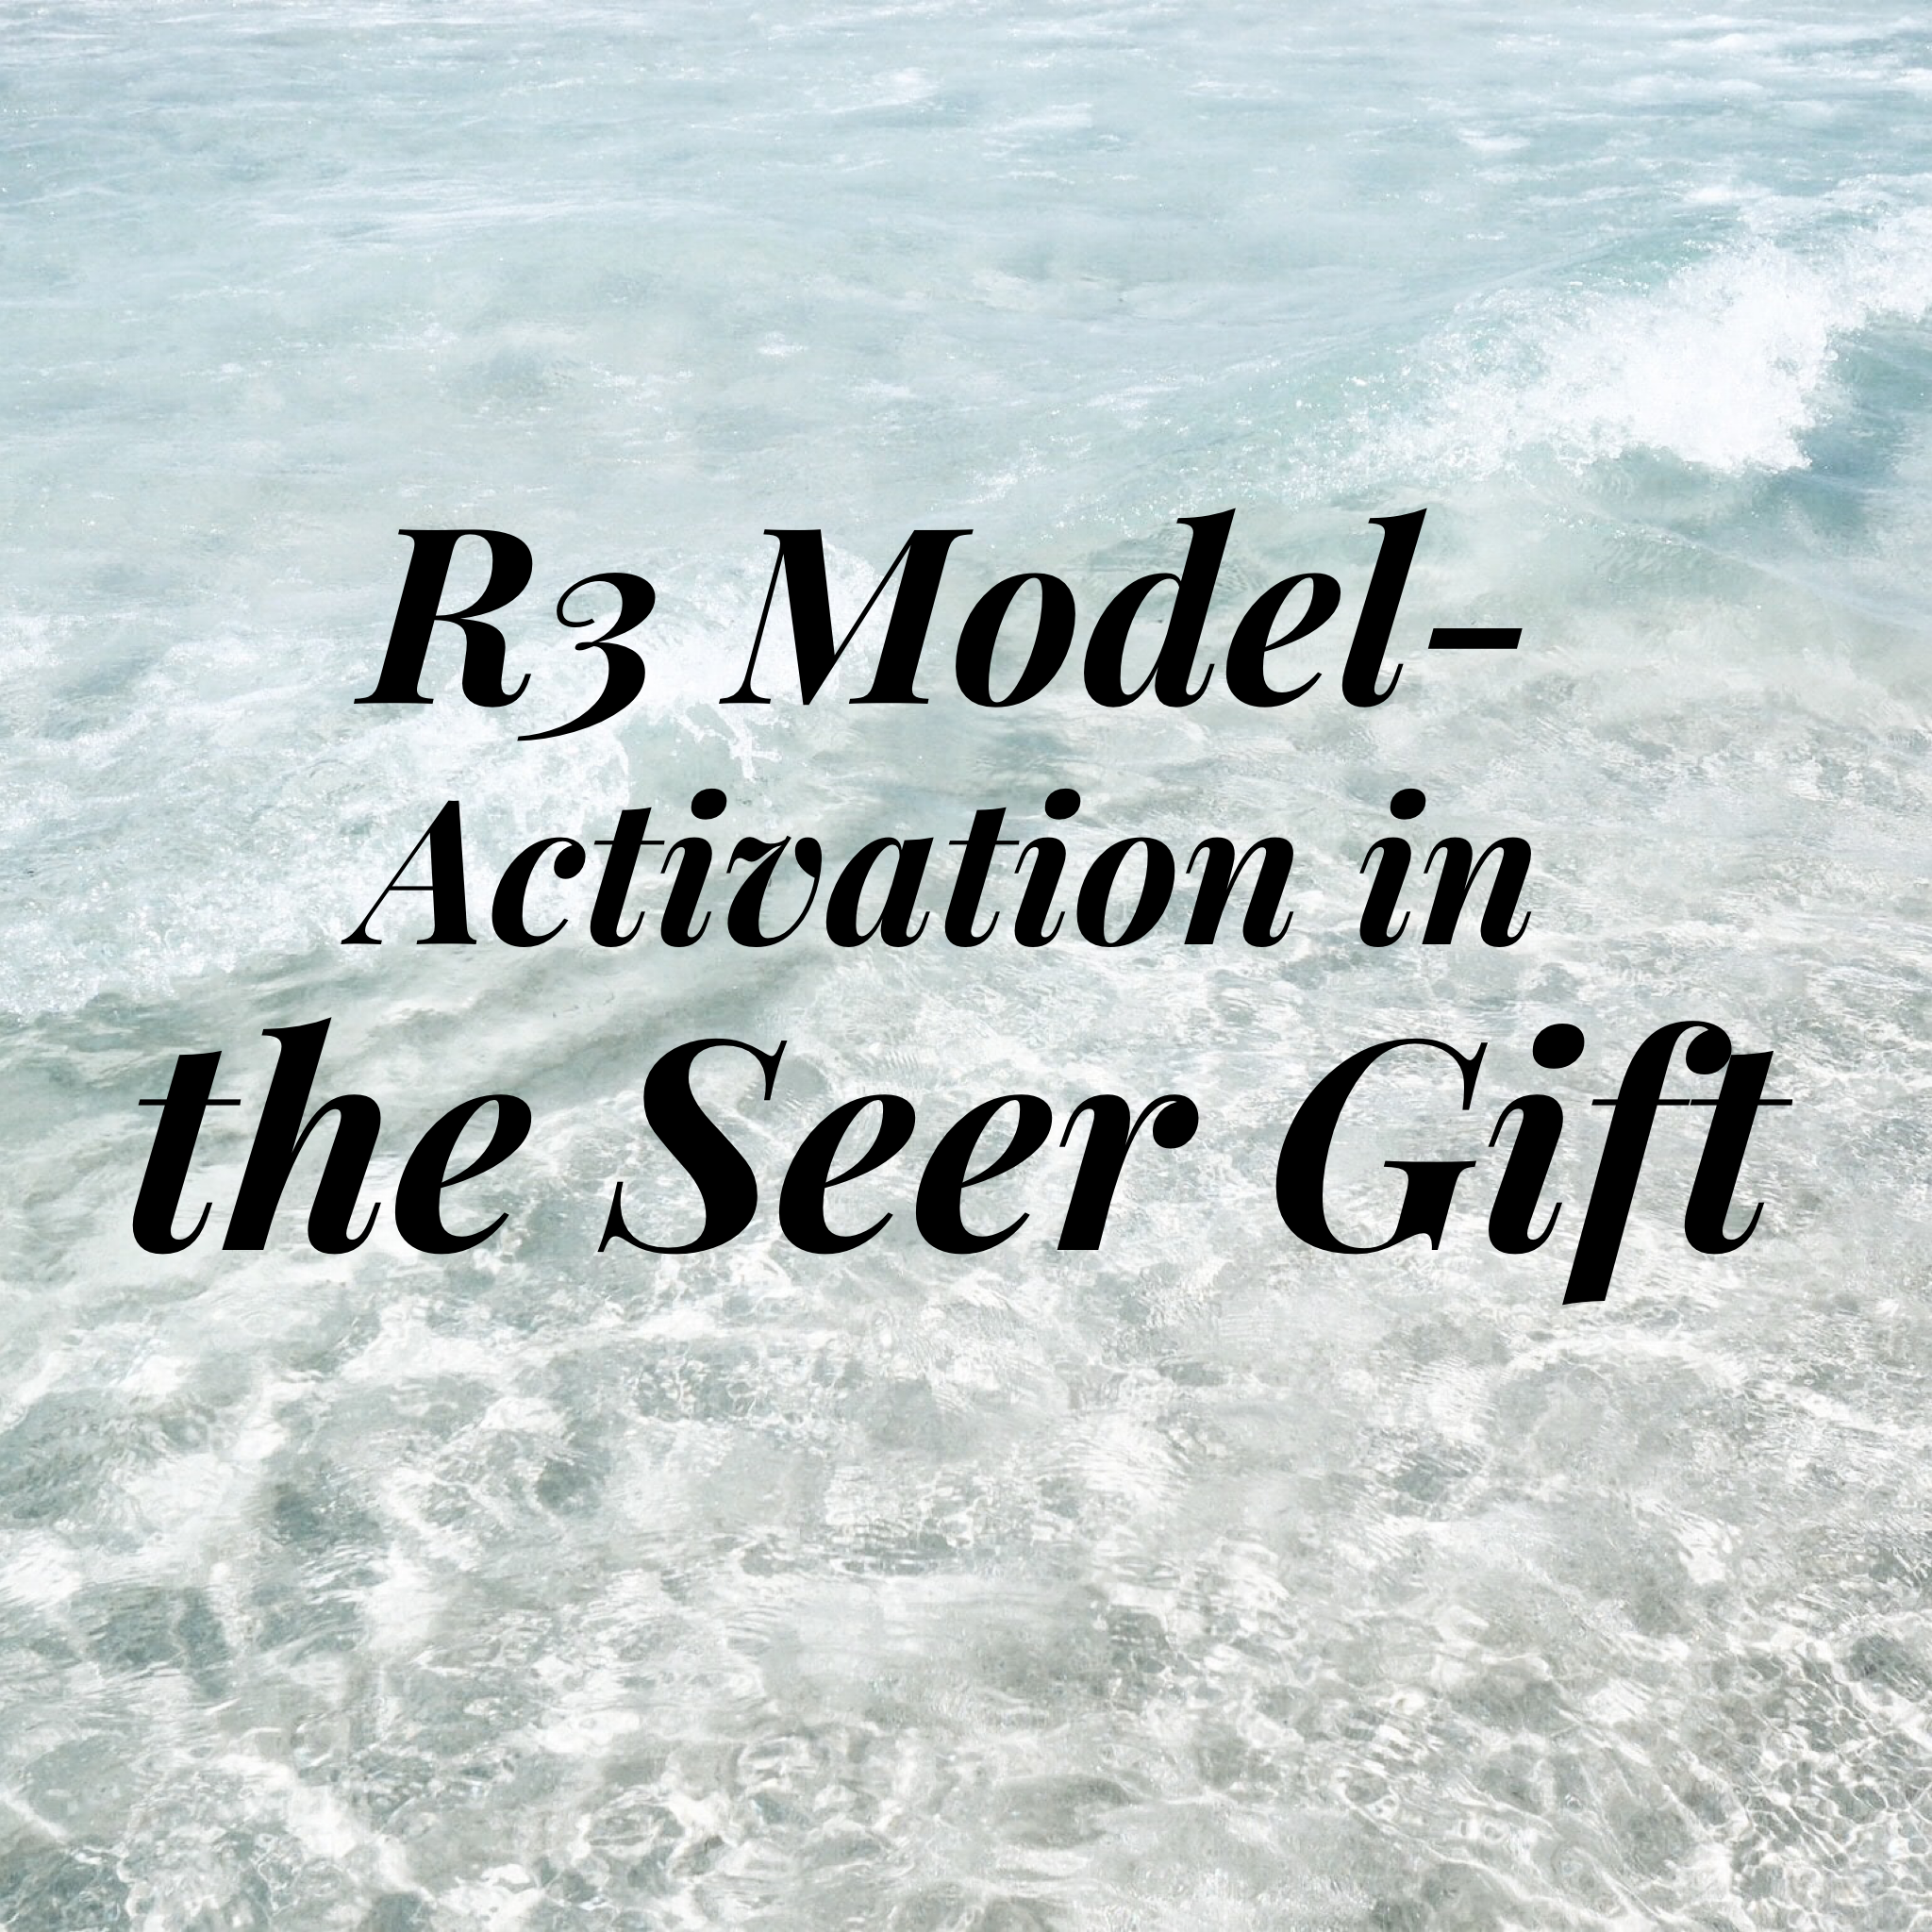 R3 Model- Activation in the Seer Gift - 7/9/19